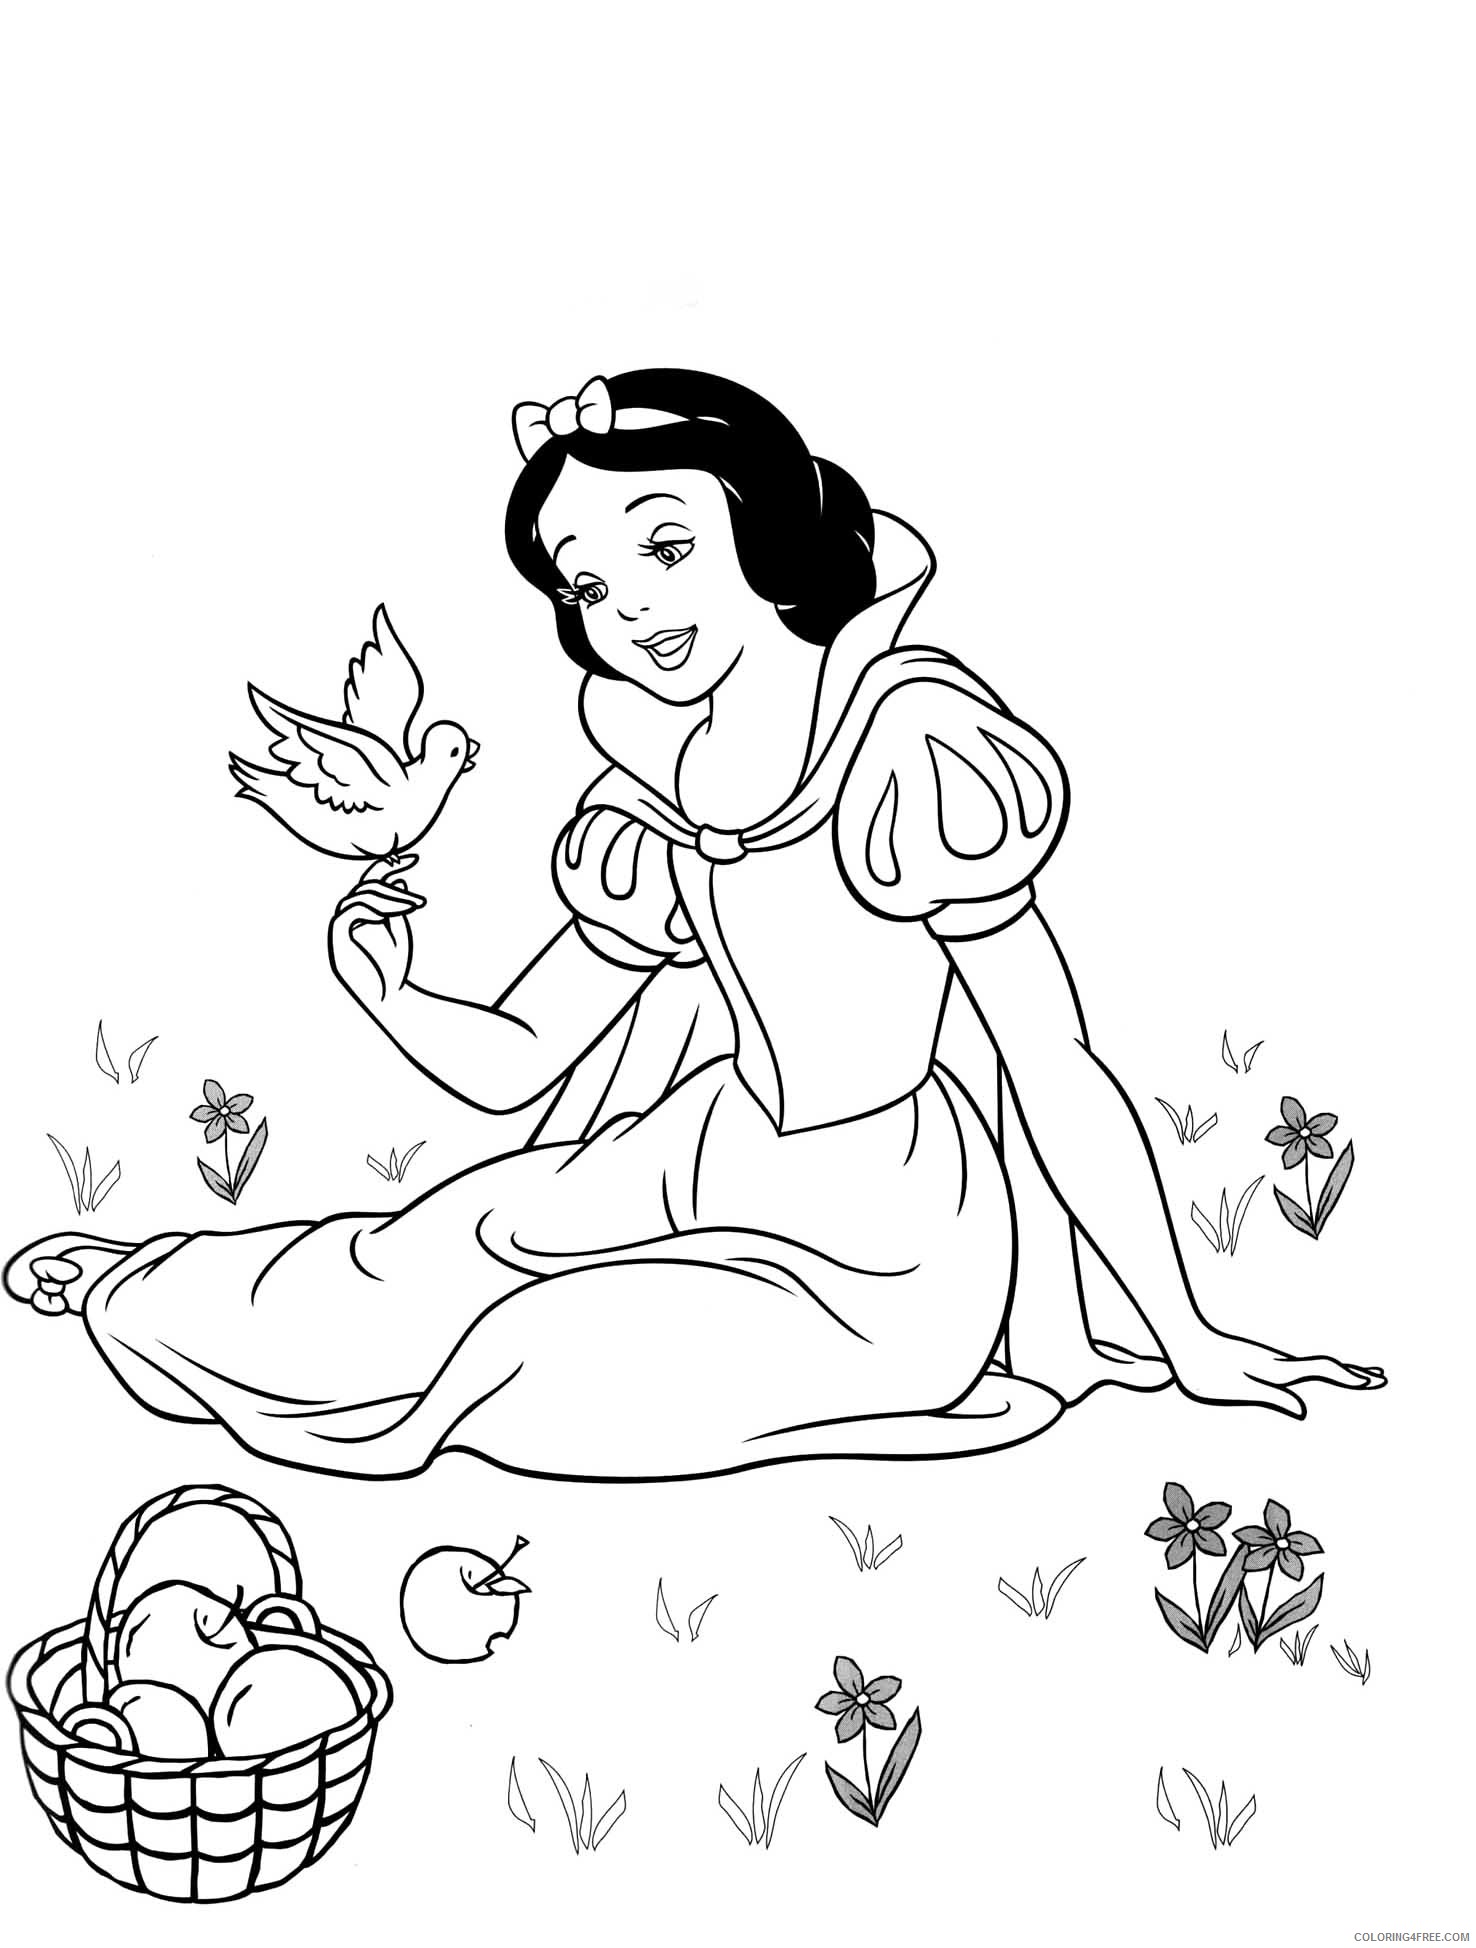 Snow White Coloring Pages Cartoons Snow White Free 2 Printable 2020 5802 Coloring4free